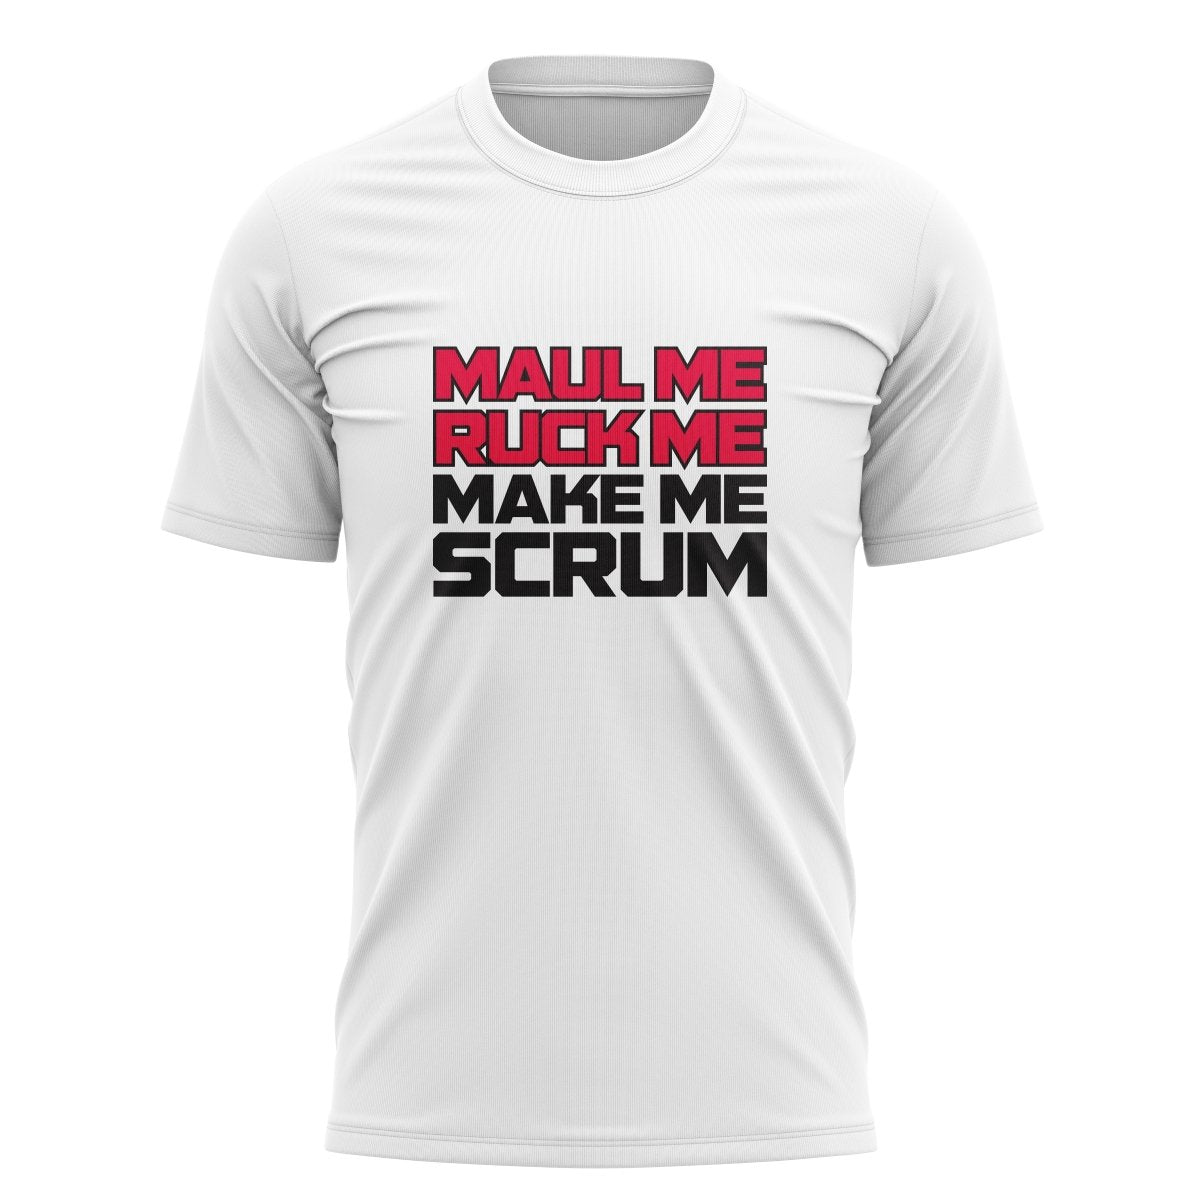 Maul Me Ruck Me Graphic Tee - www.therugbyshop.com www.therugbyshop.com MEN'S / BLACK / S XIX Brands TEES Maul Me Ruck Me Graphic Tee